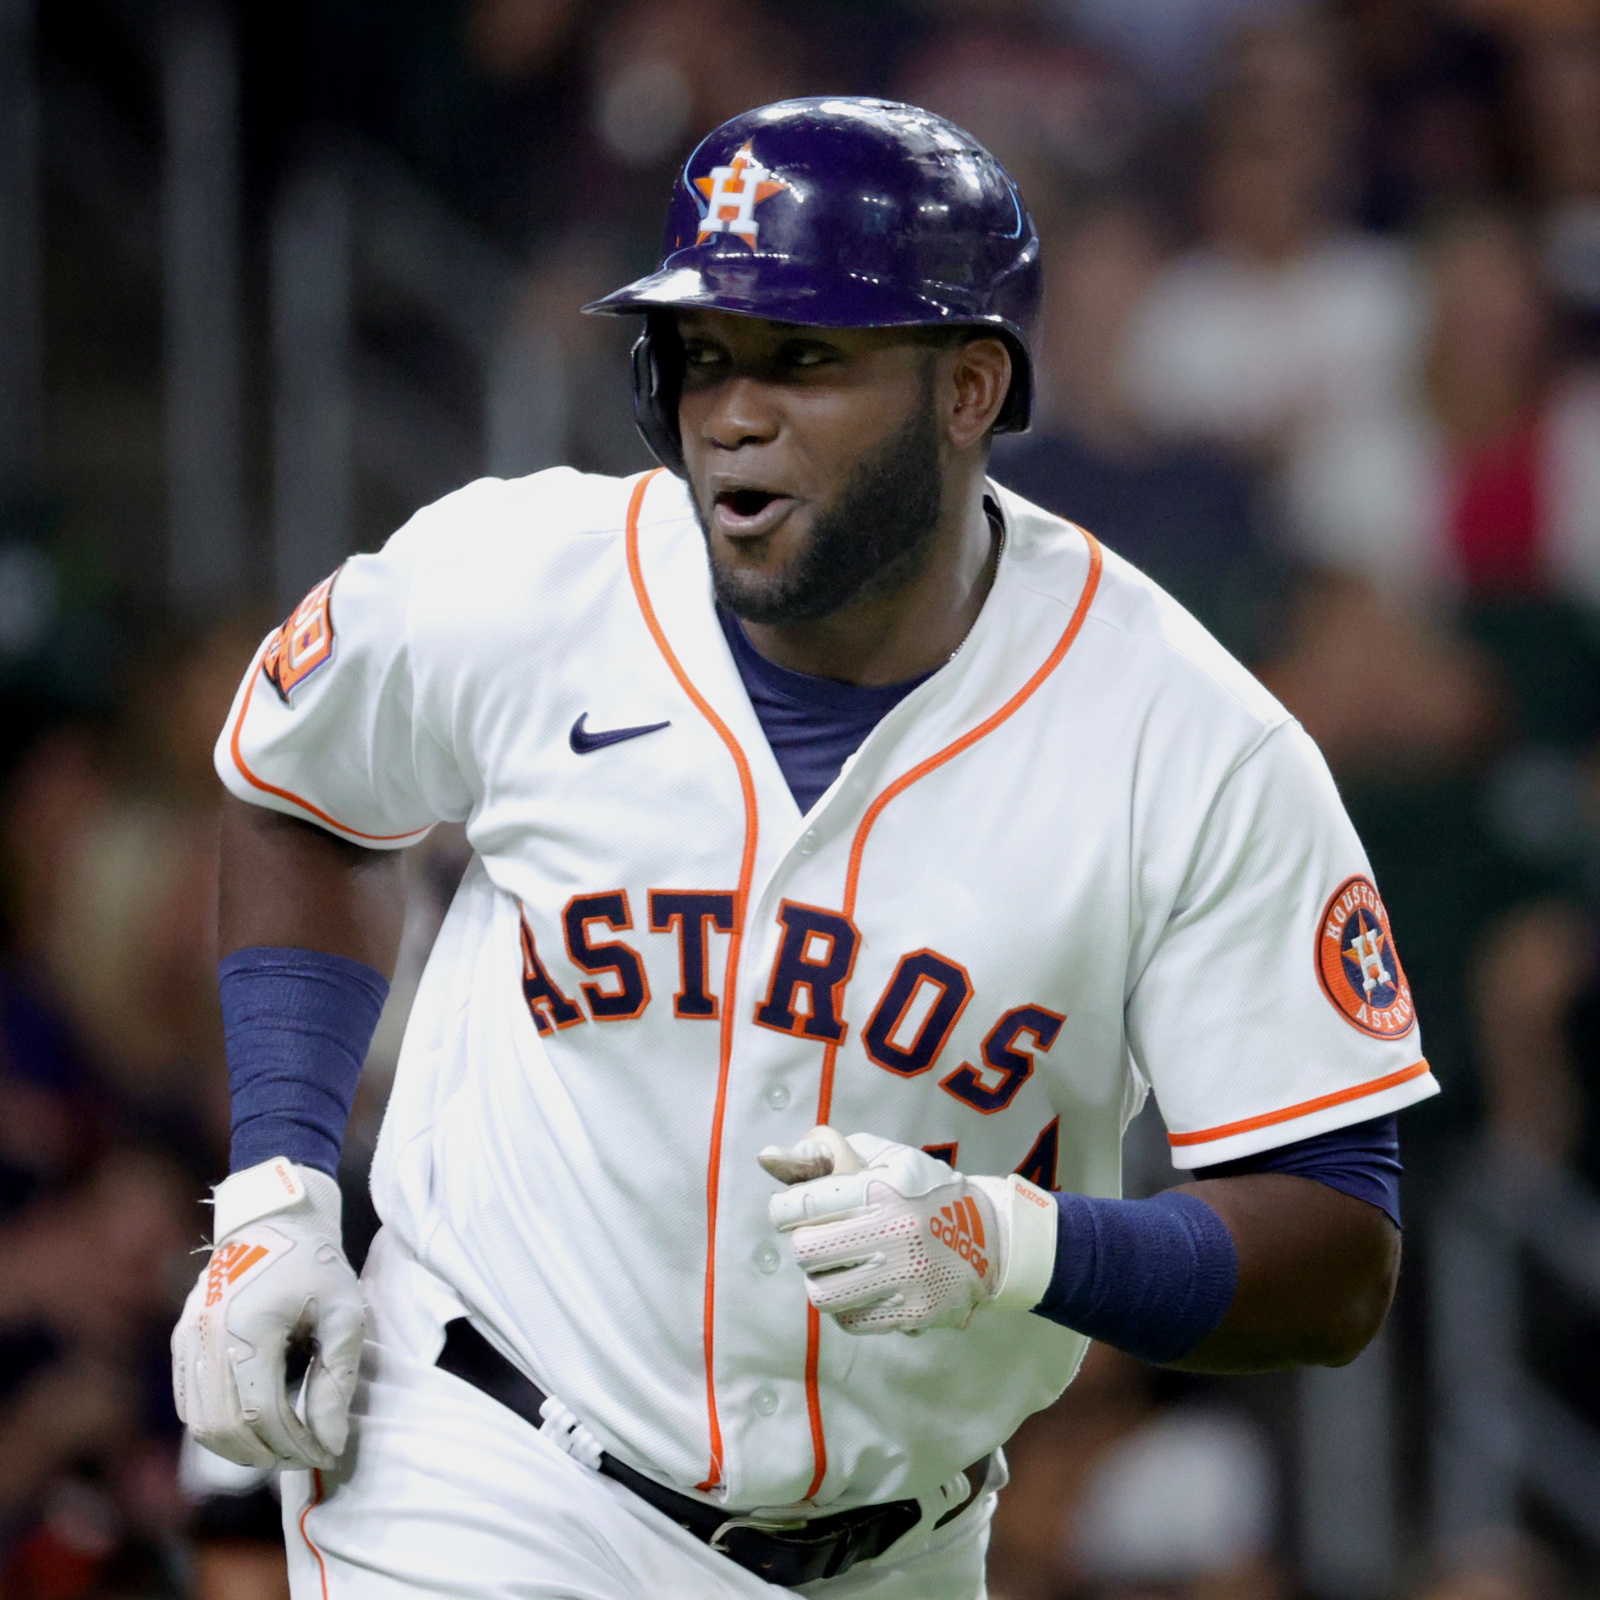 Contract situation for each Astros player in 2019 season